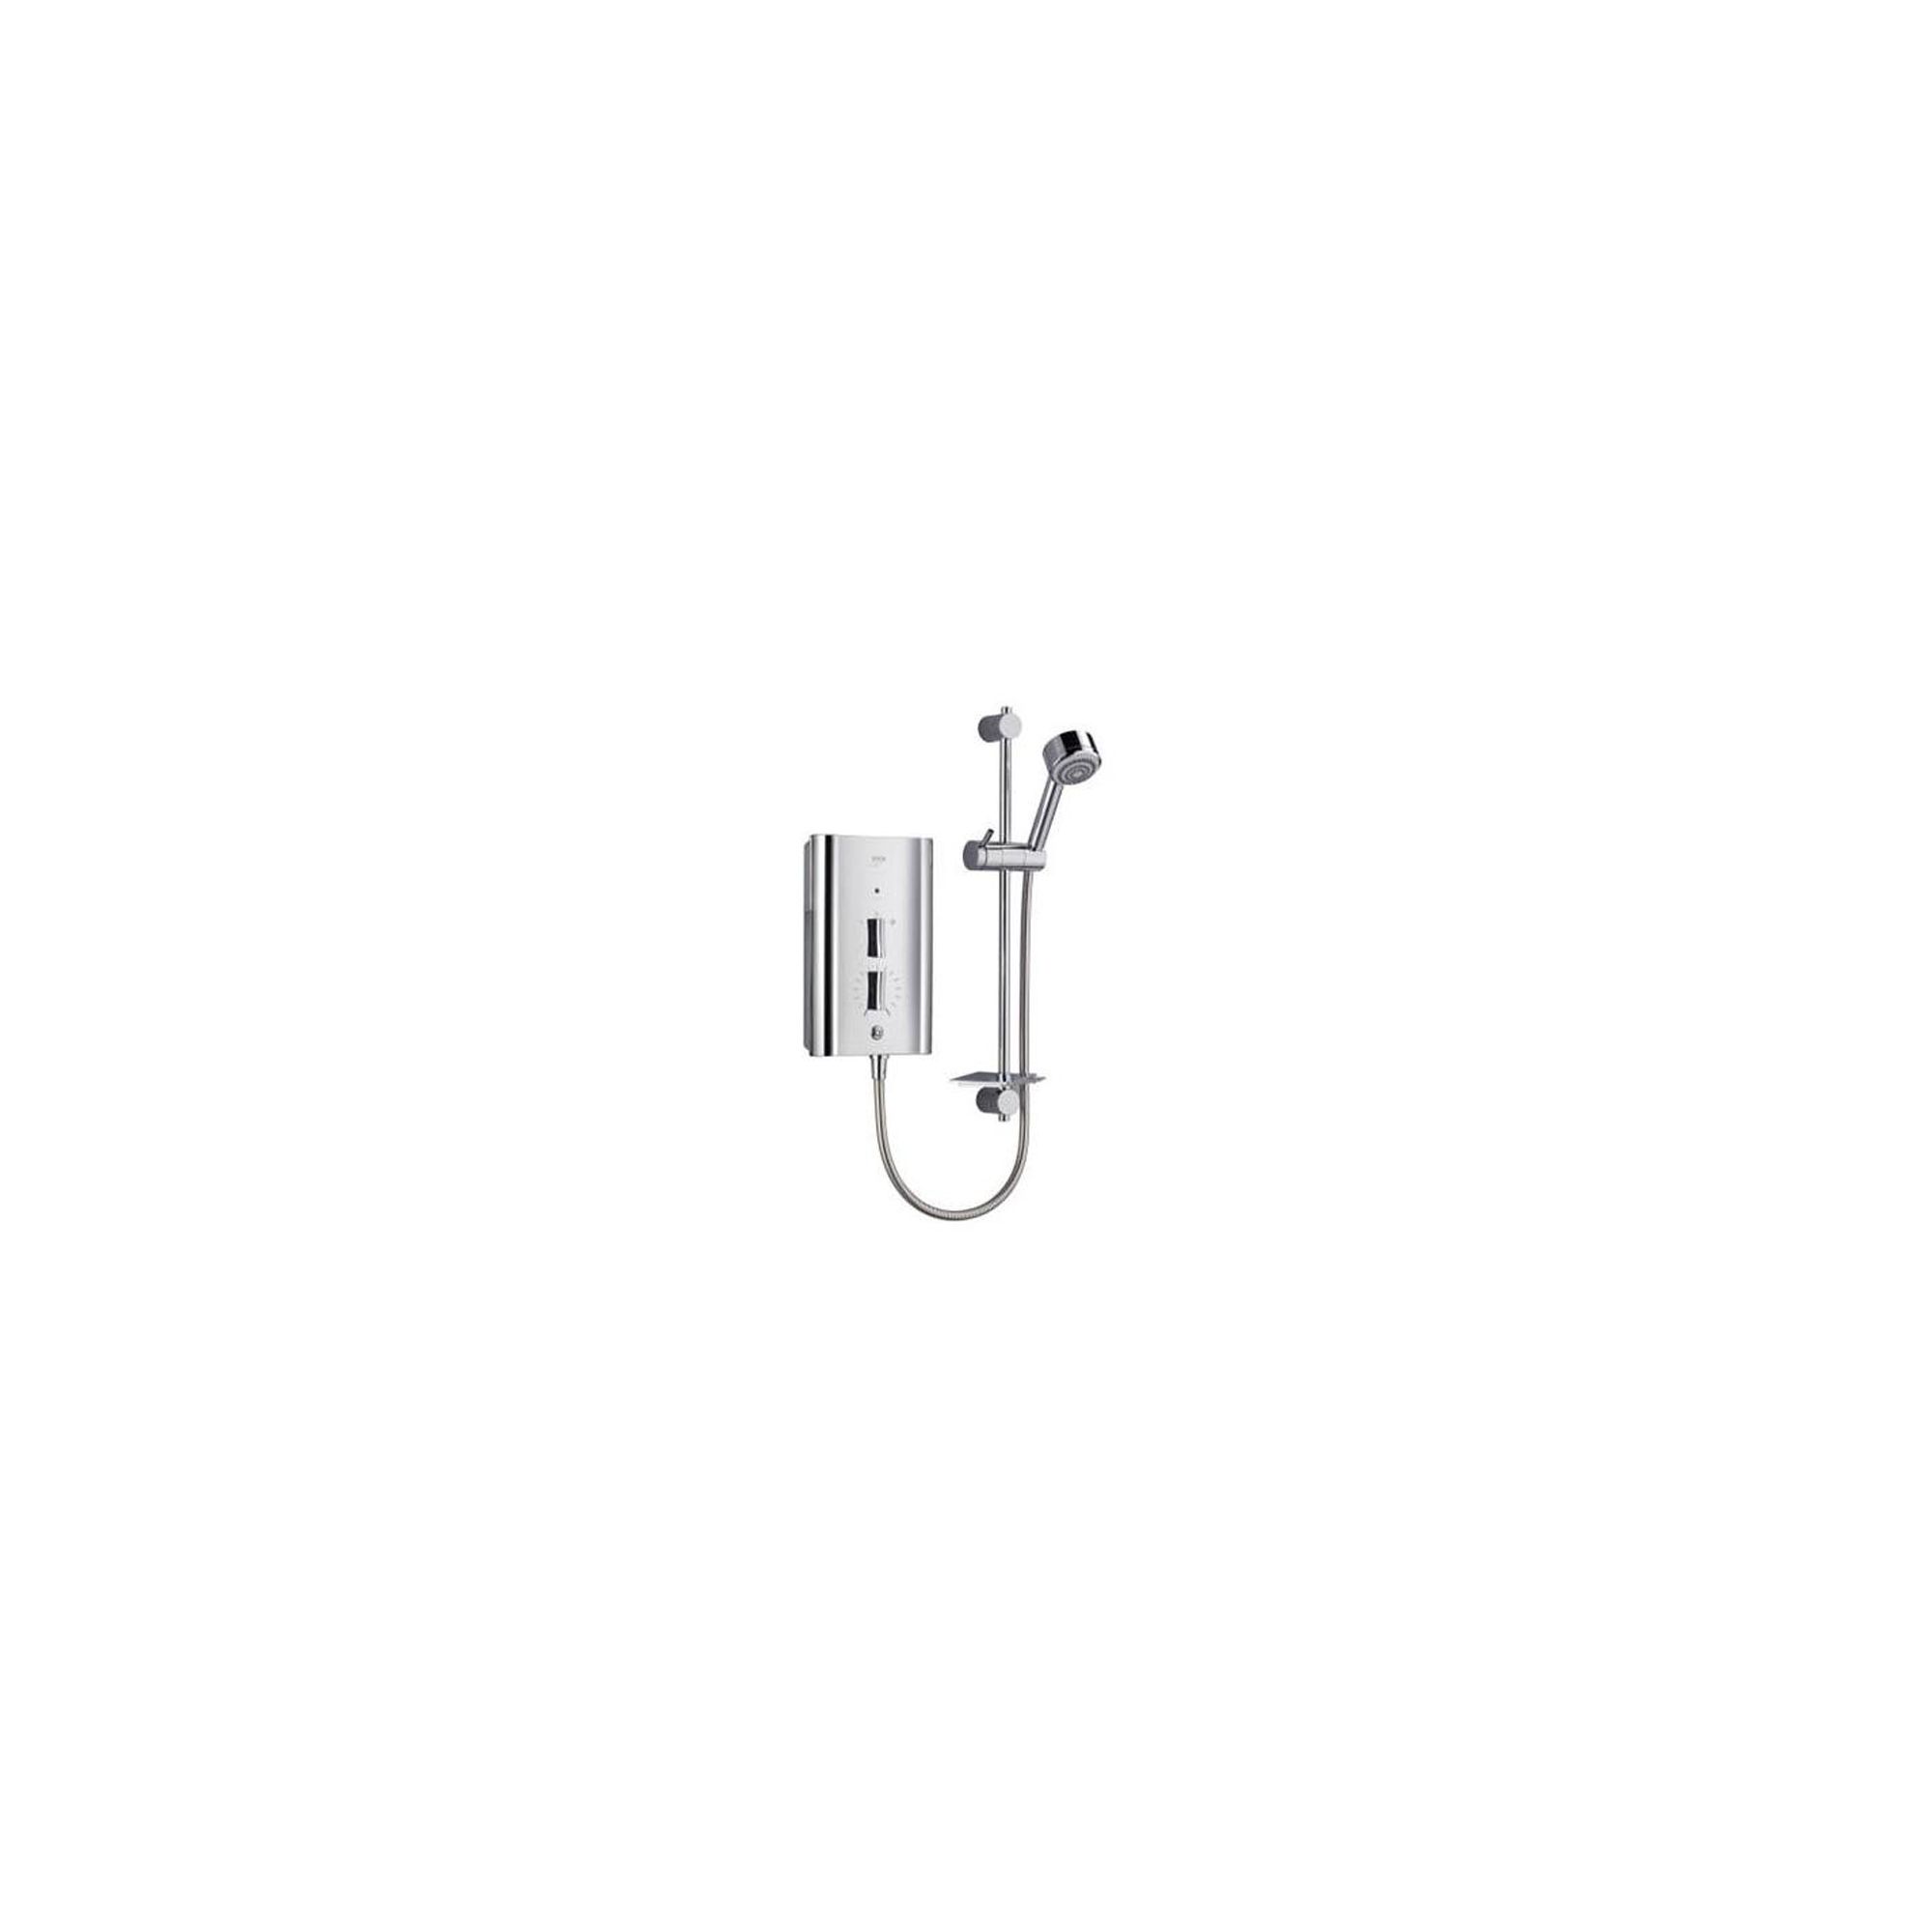 Mira Escape 9.8 kW Electric Shower, 4 Spray Handset, Chrome at Tesco Direct